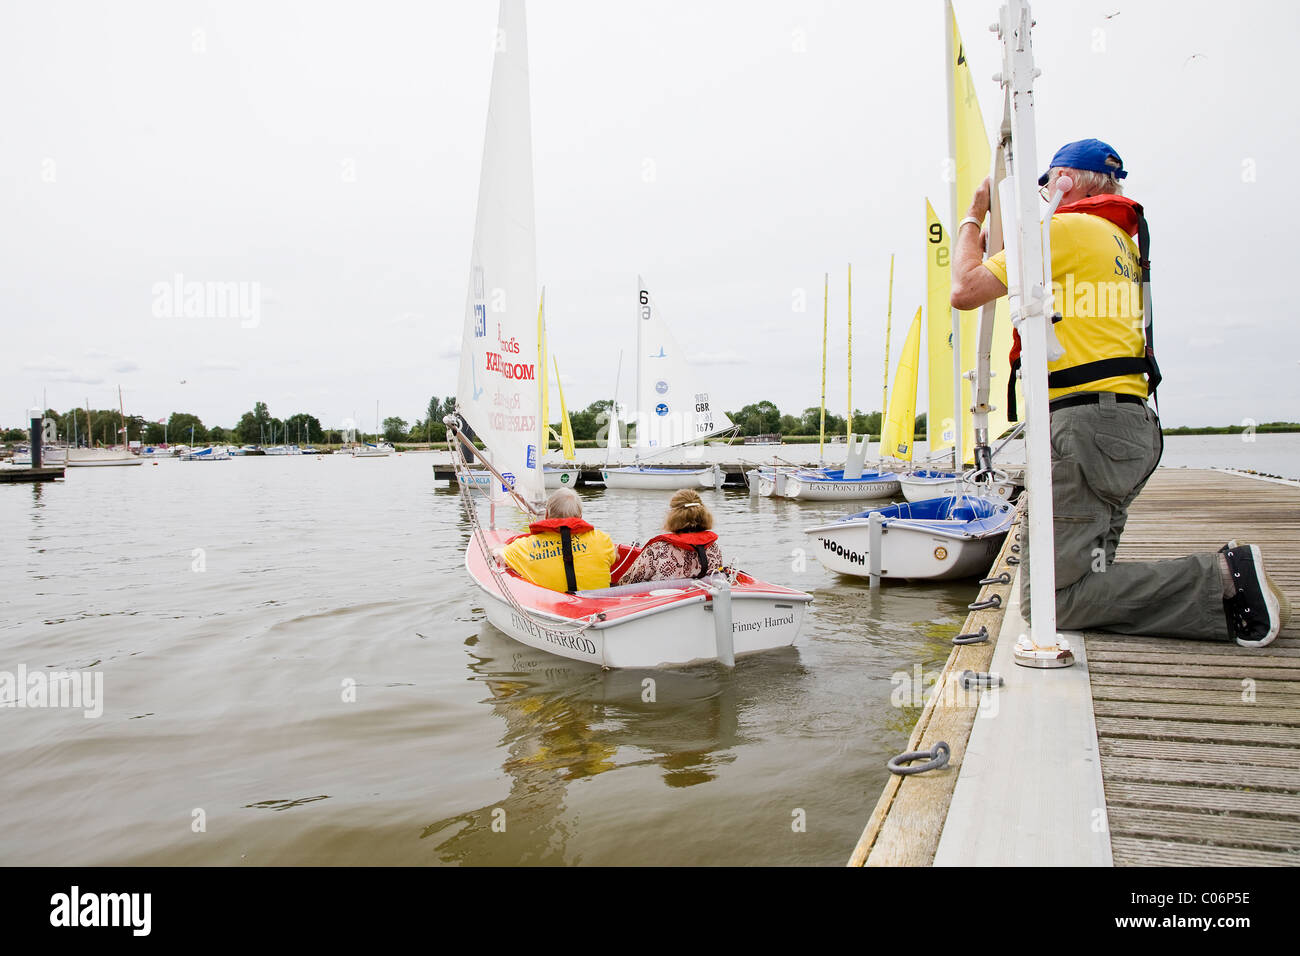 Sail dinghy, modified for disabled people, launches at Oulton Broad - courtesy of the Waveney Sailability Trust Stock Photo